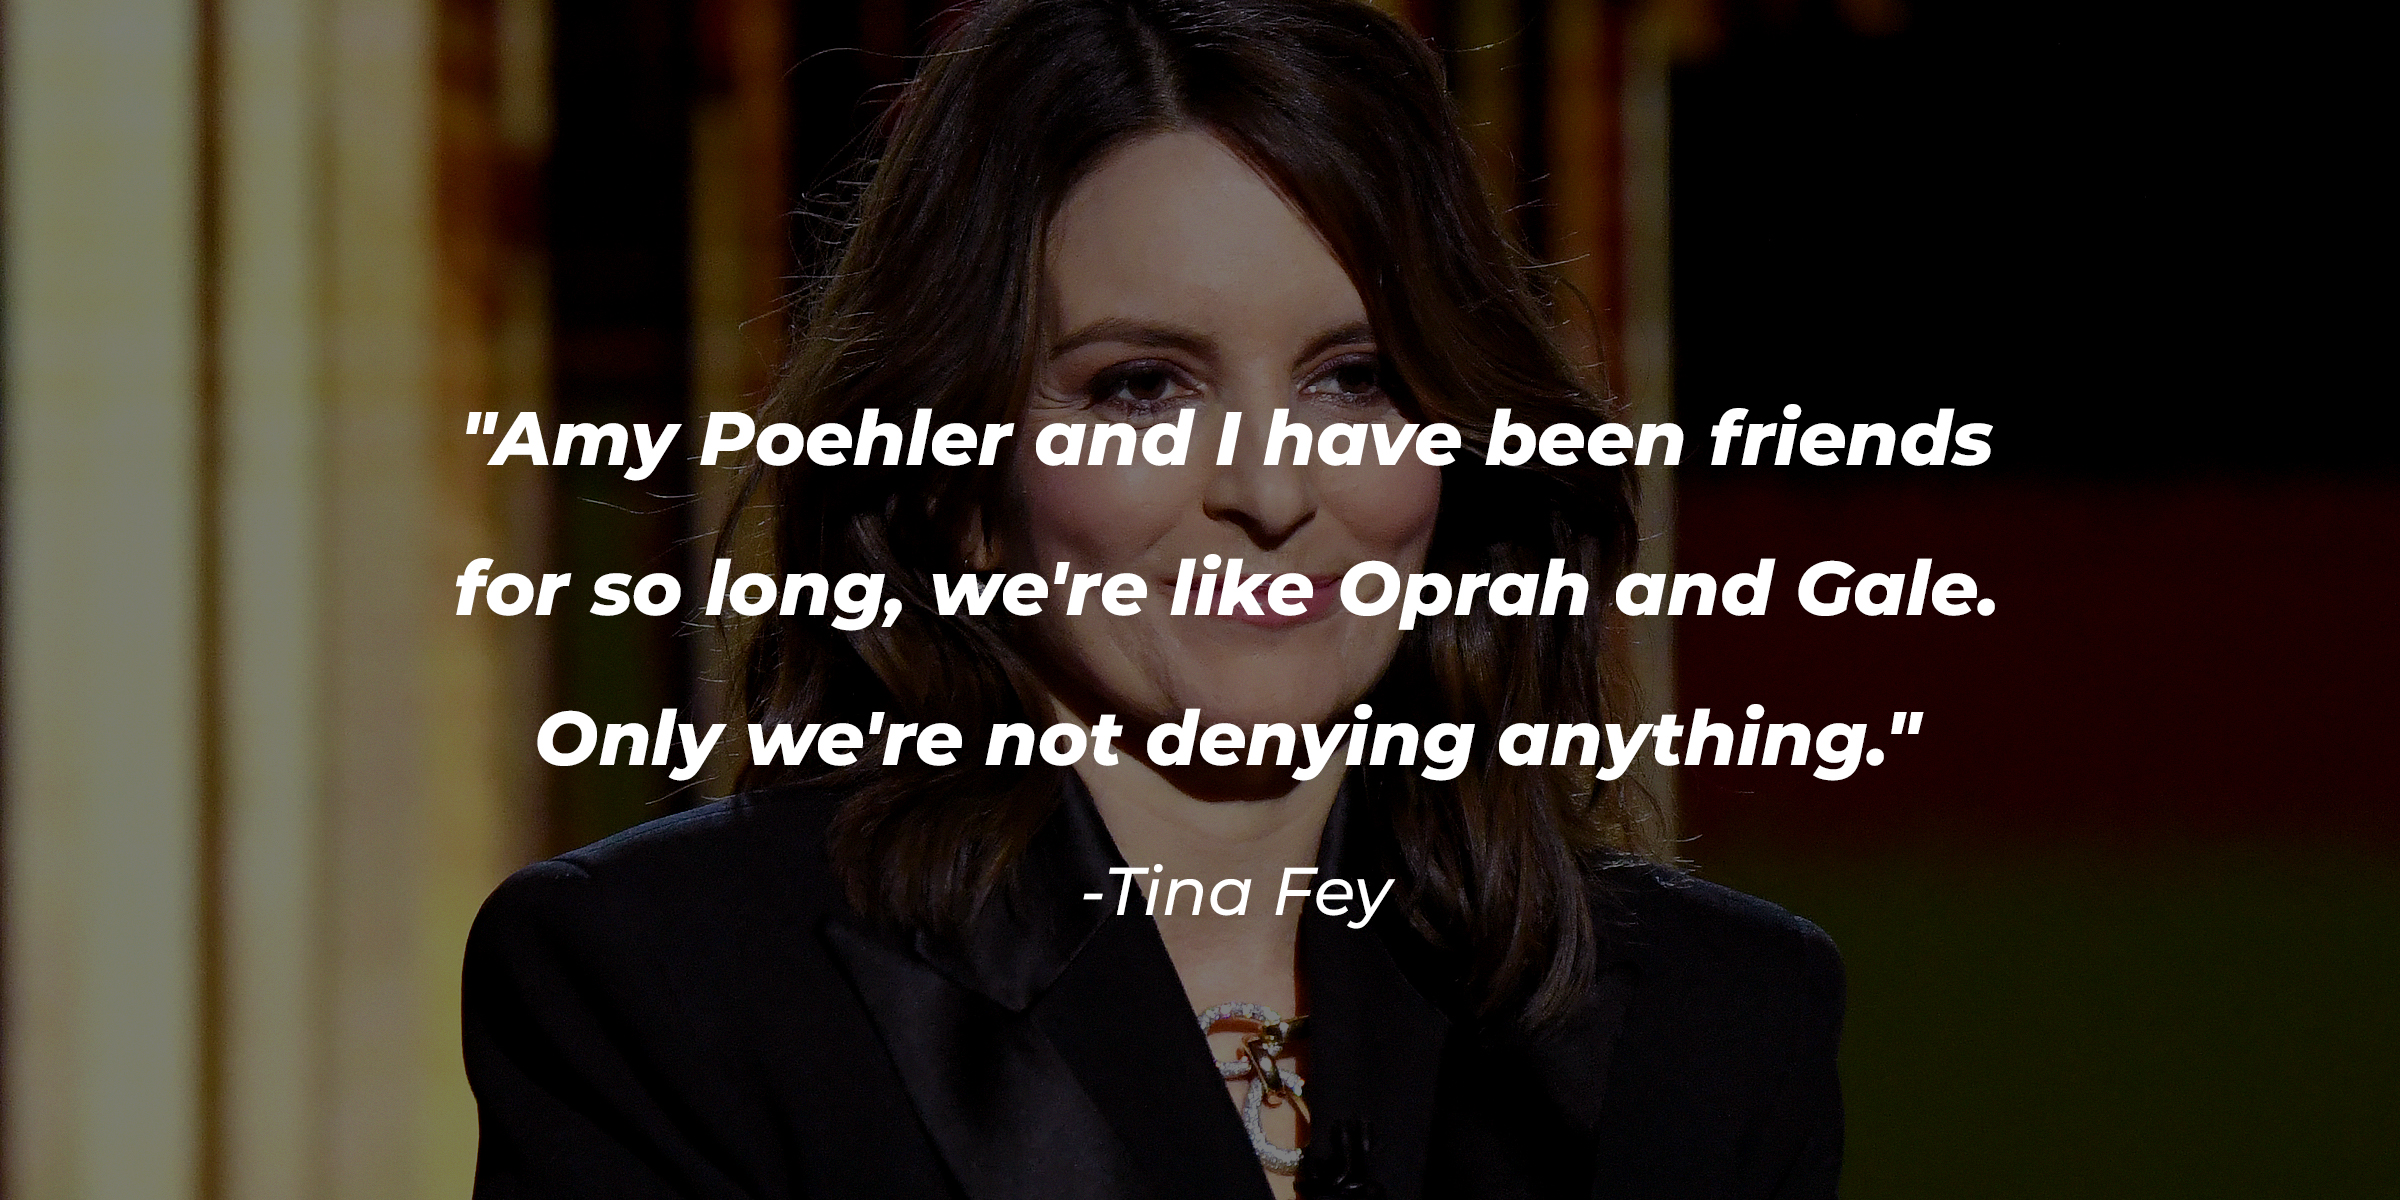 Tina Fey with her quote "Amy Poehler and I have been friends for so long, we're like Oprah and Gale. Only we're not denying anything." | Source: Getty Images